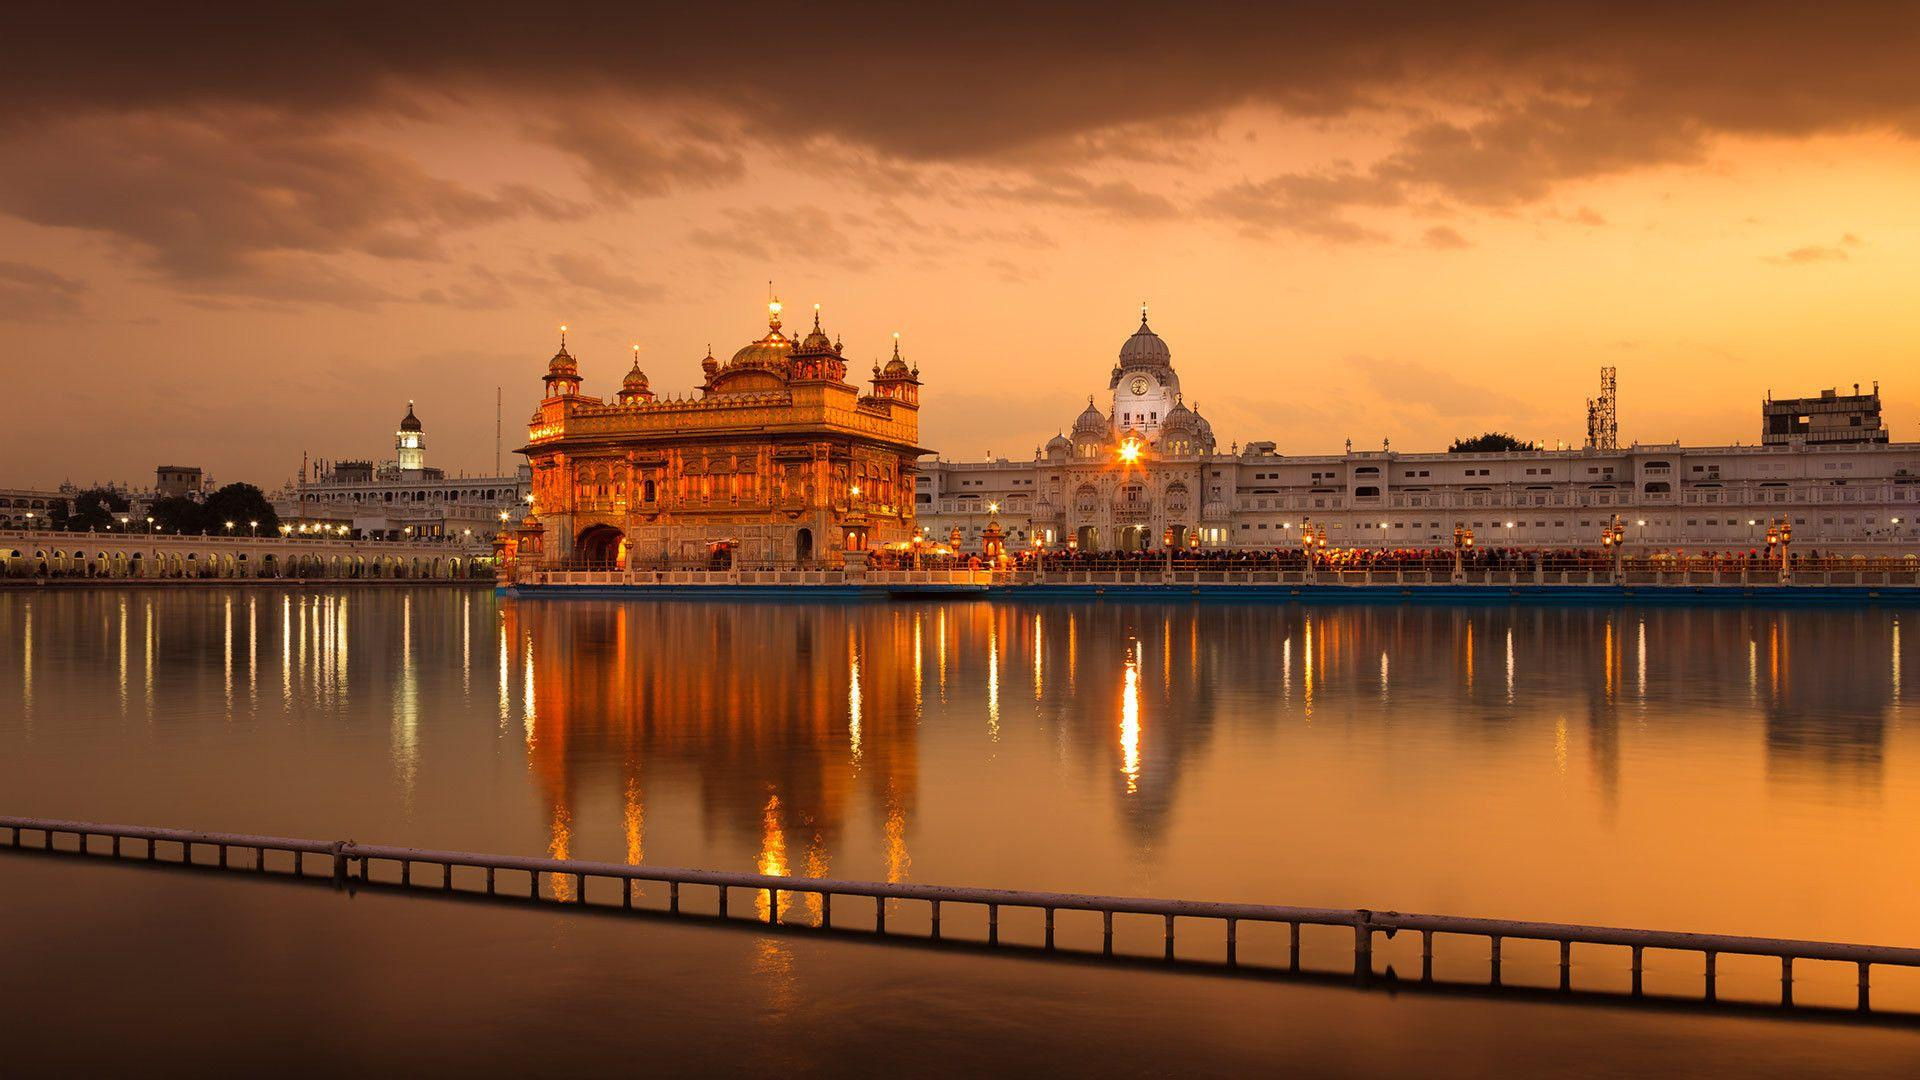 Old Golden Temple